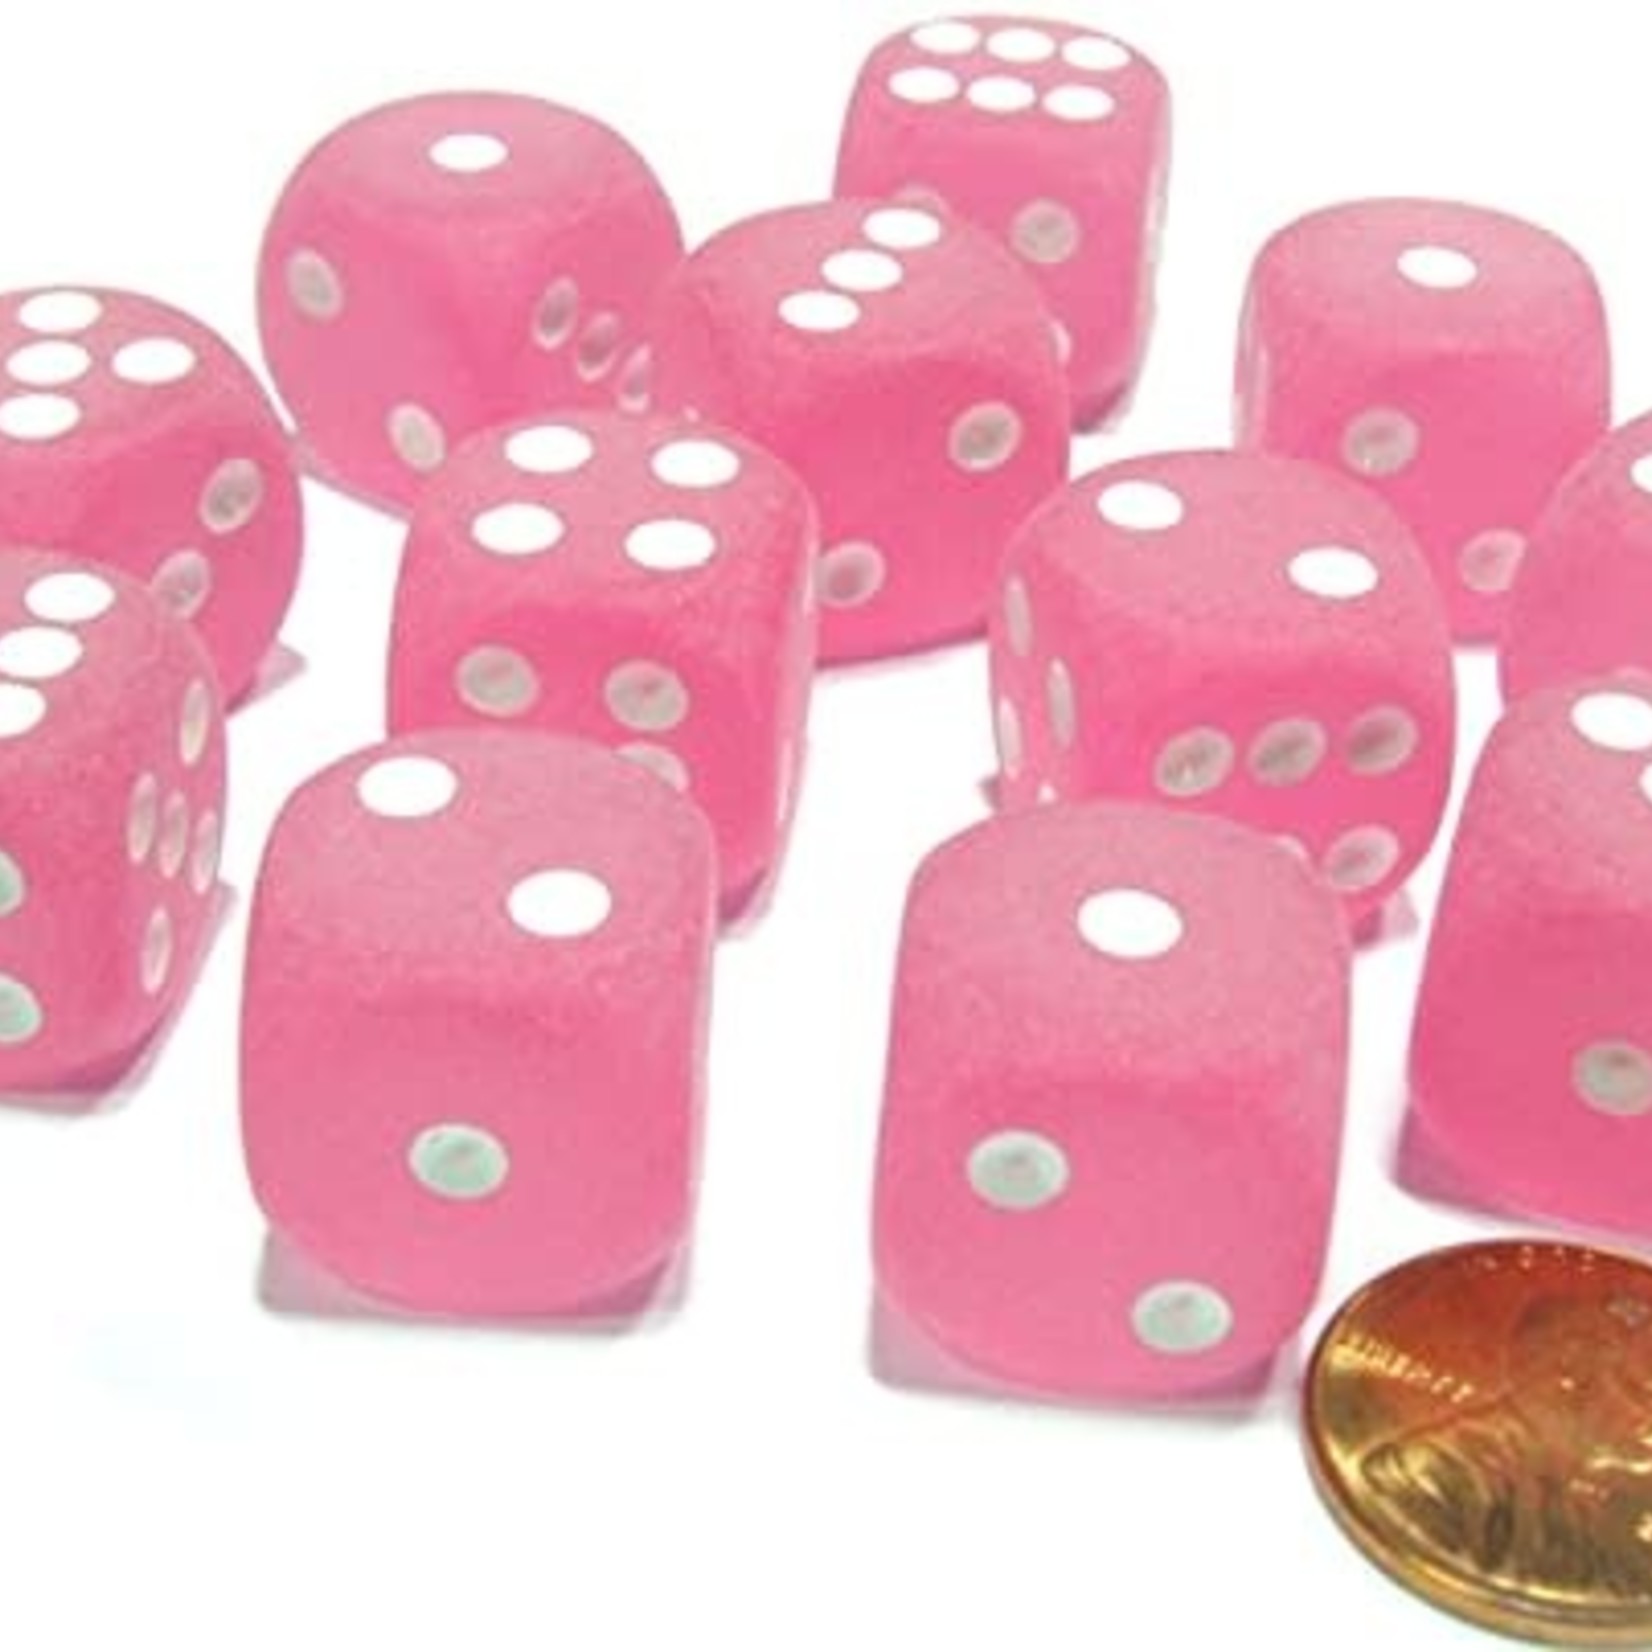 Chessex Chessex Frosted Pink with White Block 16 mm d6 12 die set